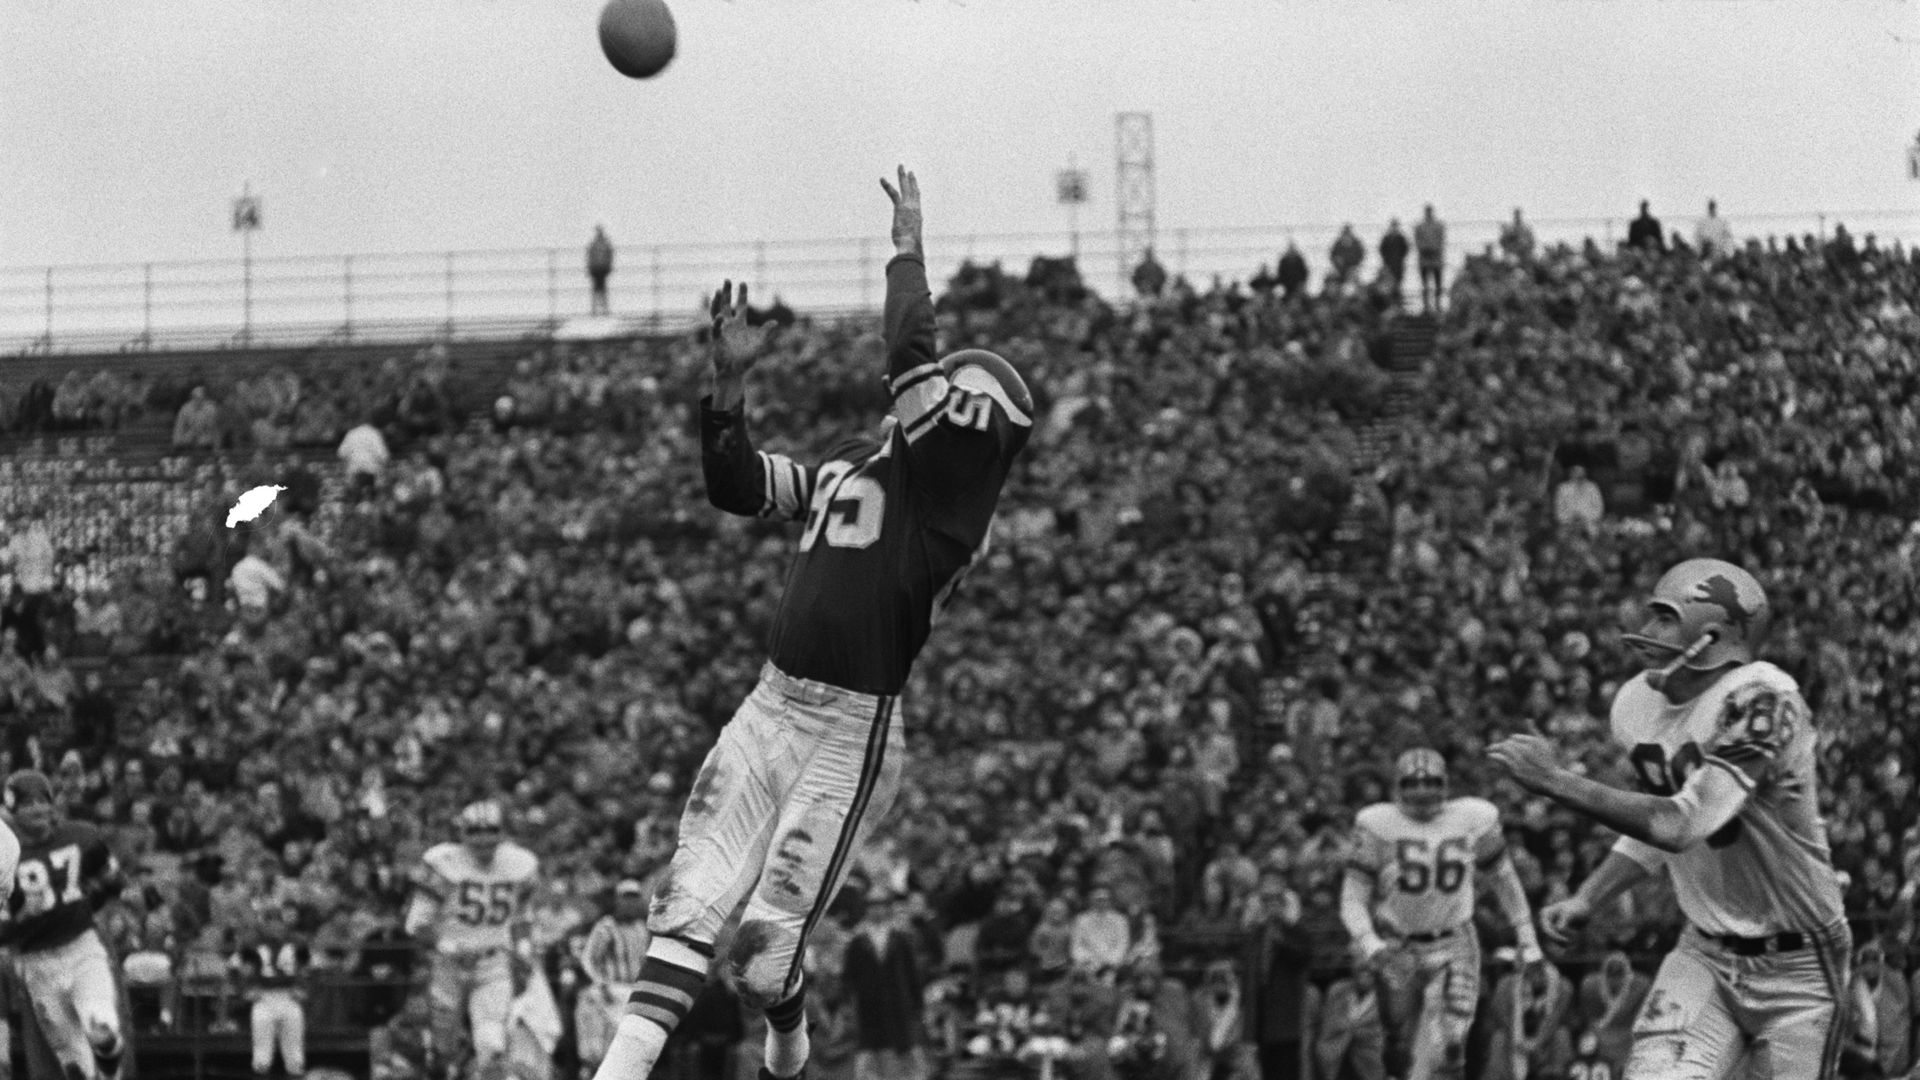 Paul Flately catches a pass from Fran Tarkenton in a 1963 game